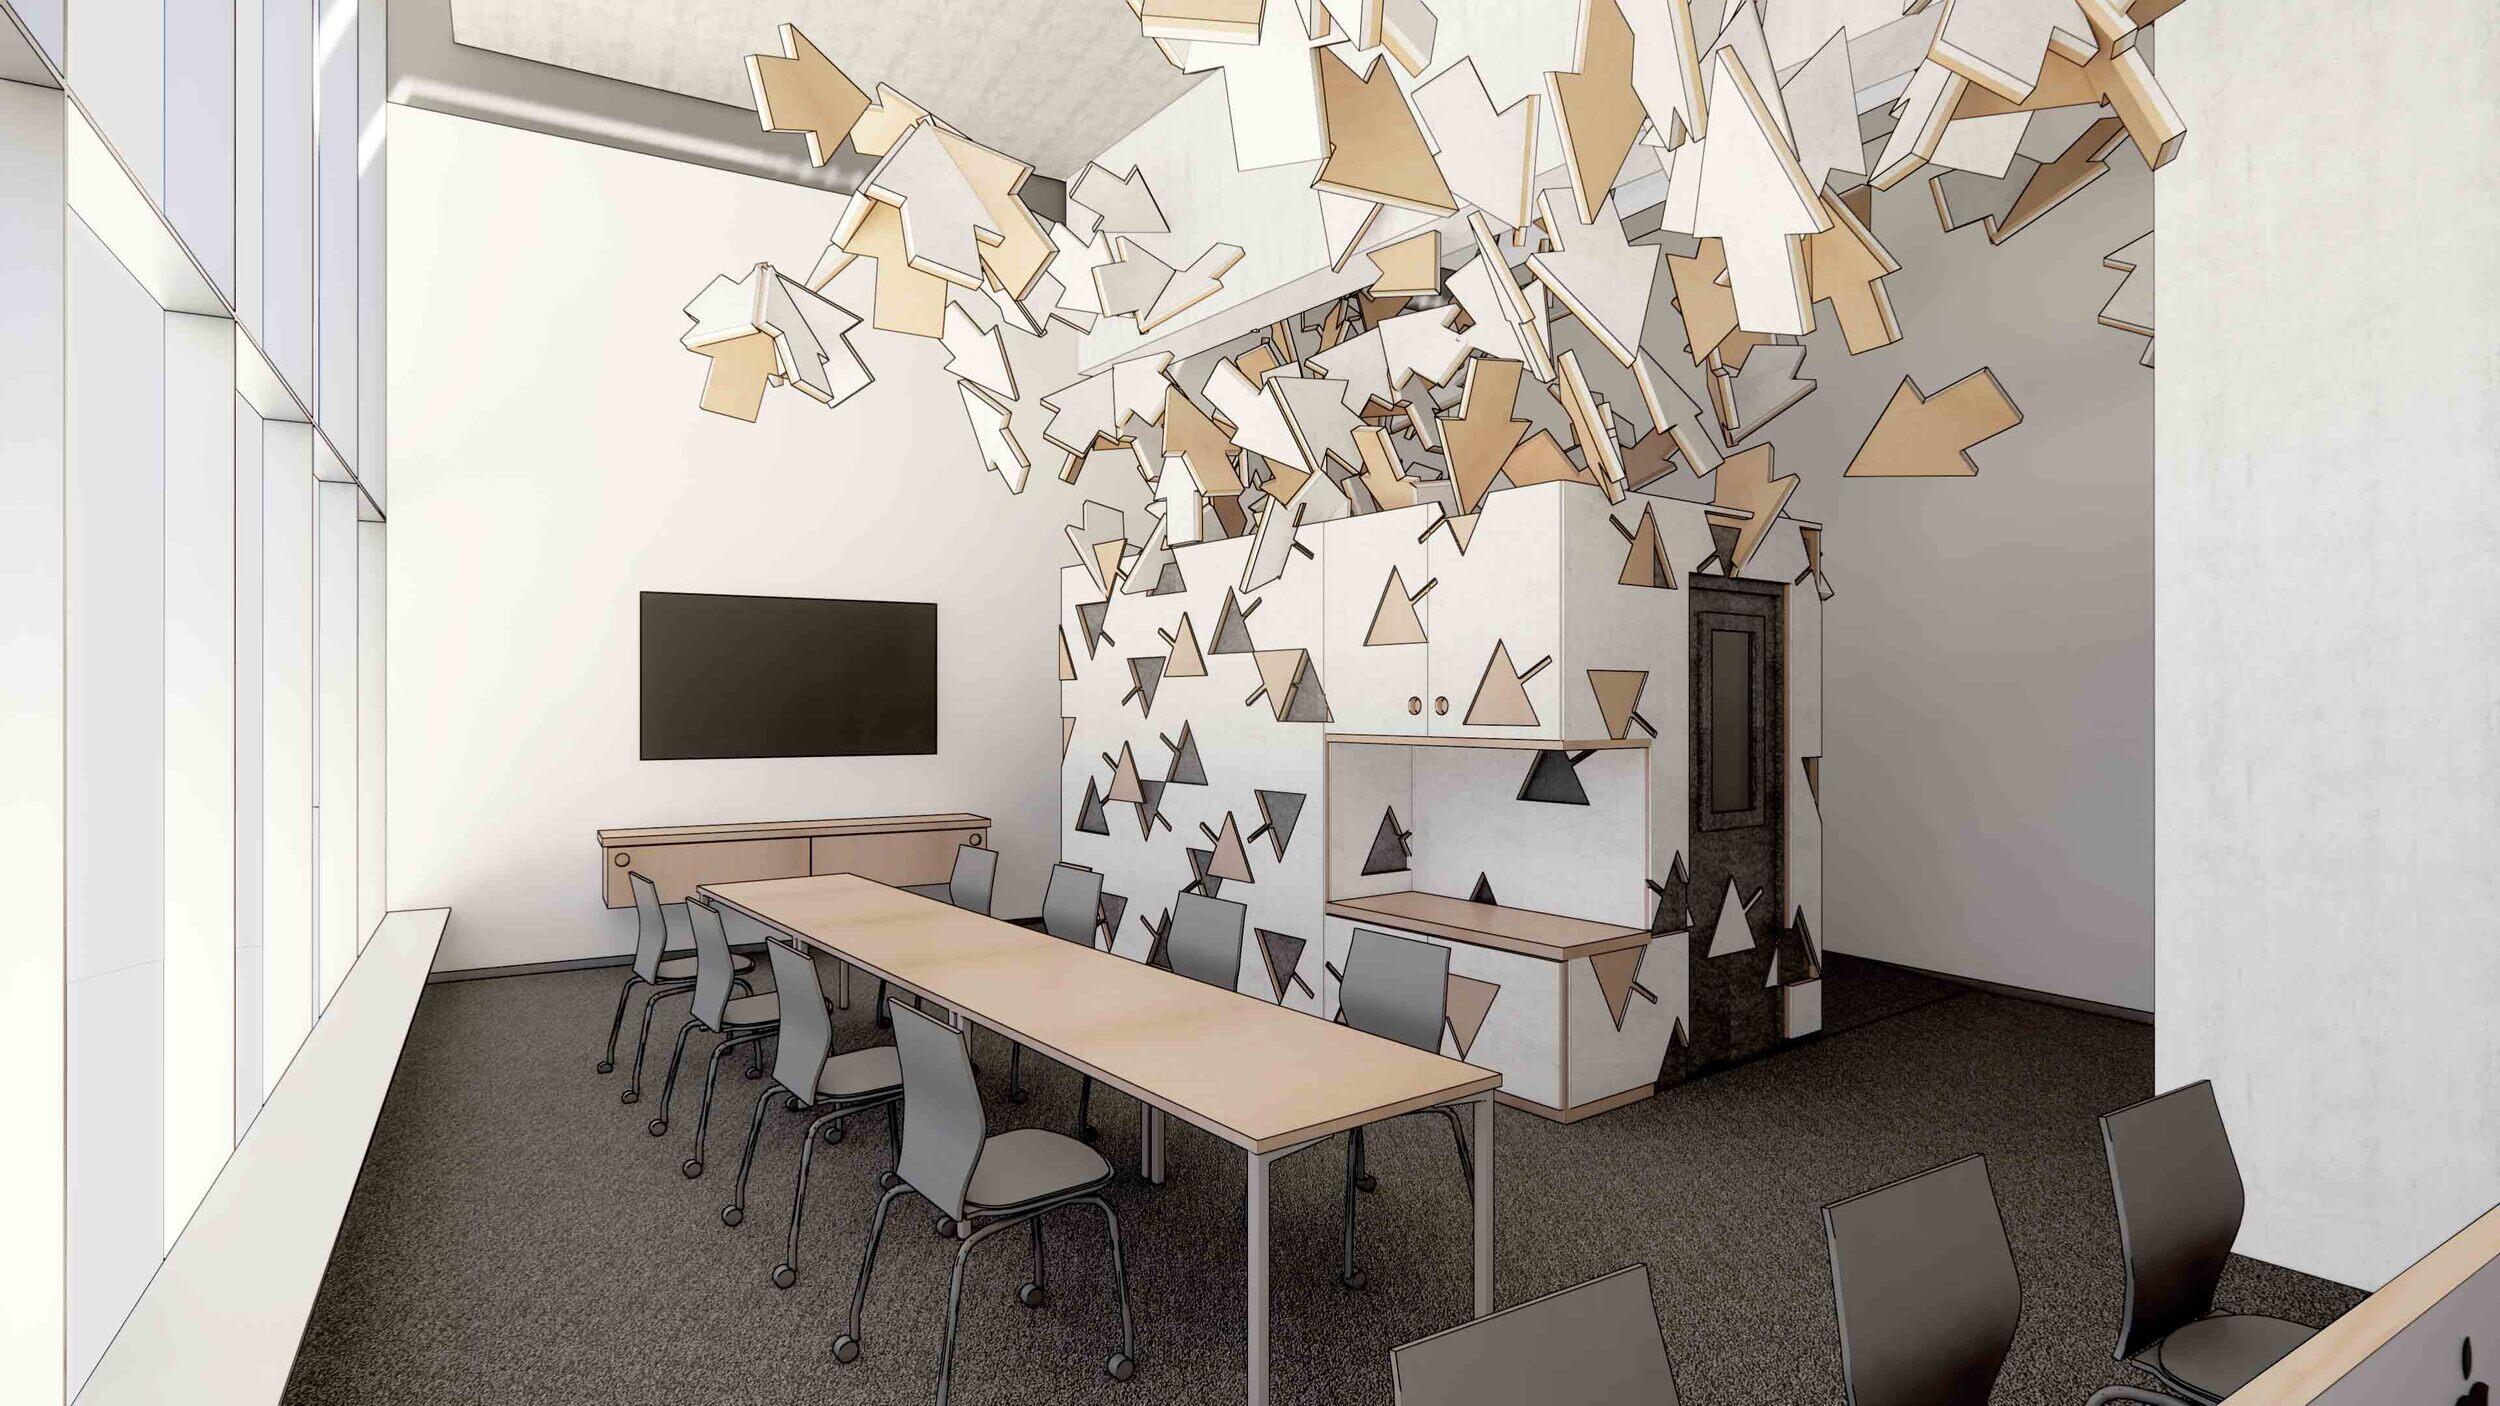 Artist rendering of the VPM + ICA Community Media Center in the Murry DePillars Learning Lab.